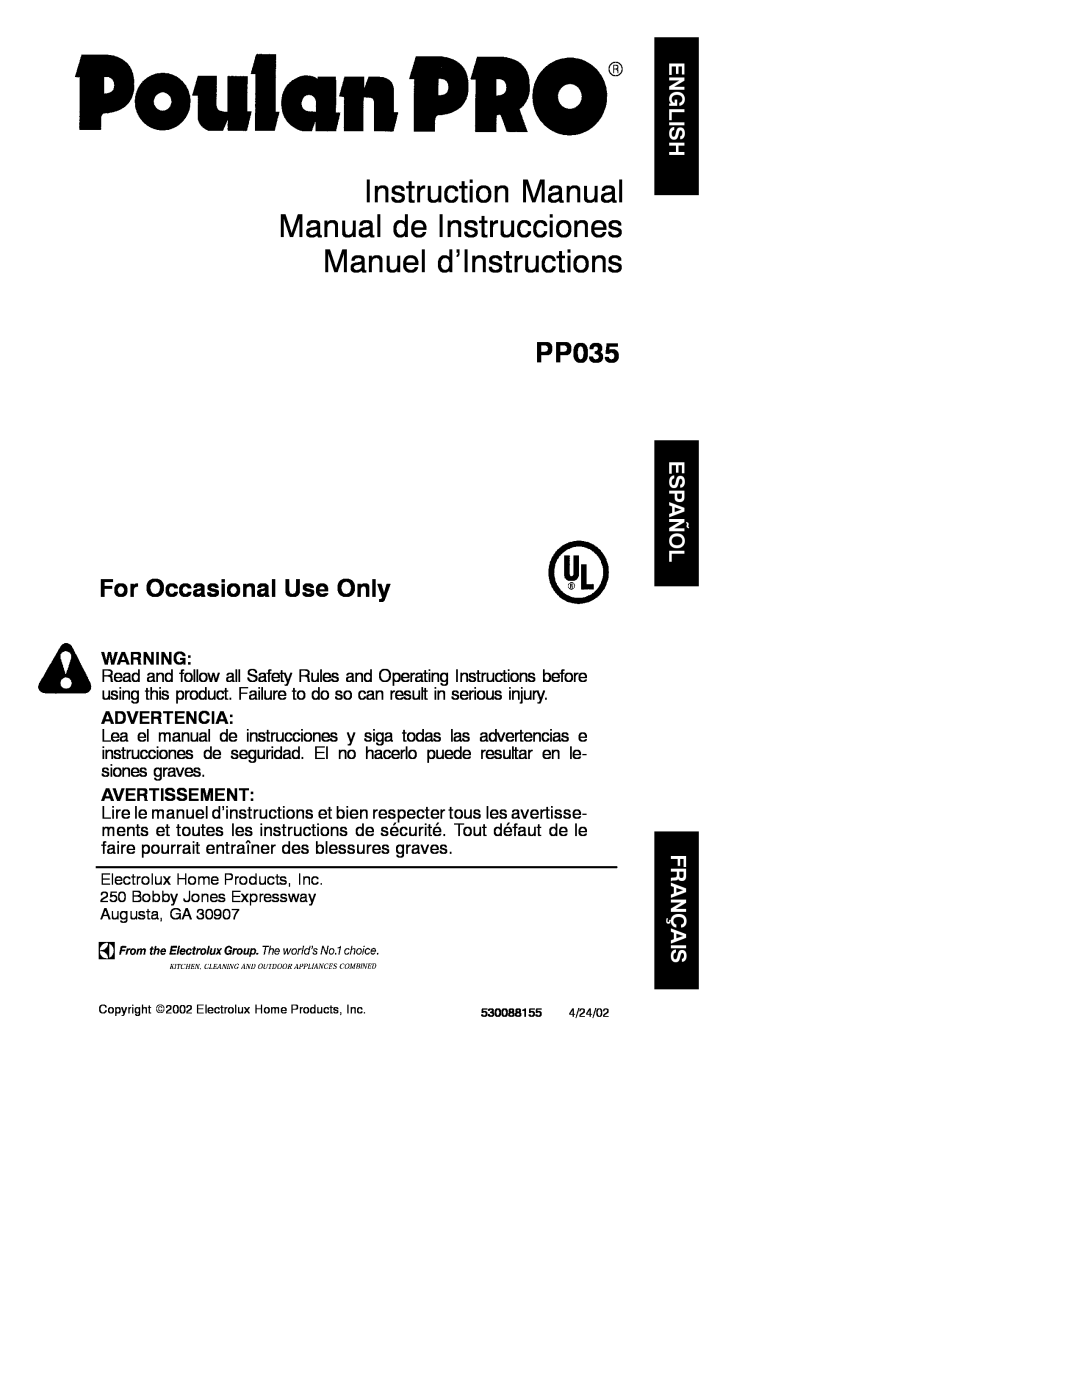 Poulan PP035 instruction manual Advertencia, Avertissement, Manuel d’Instructions, For Occasional Use Only 